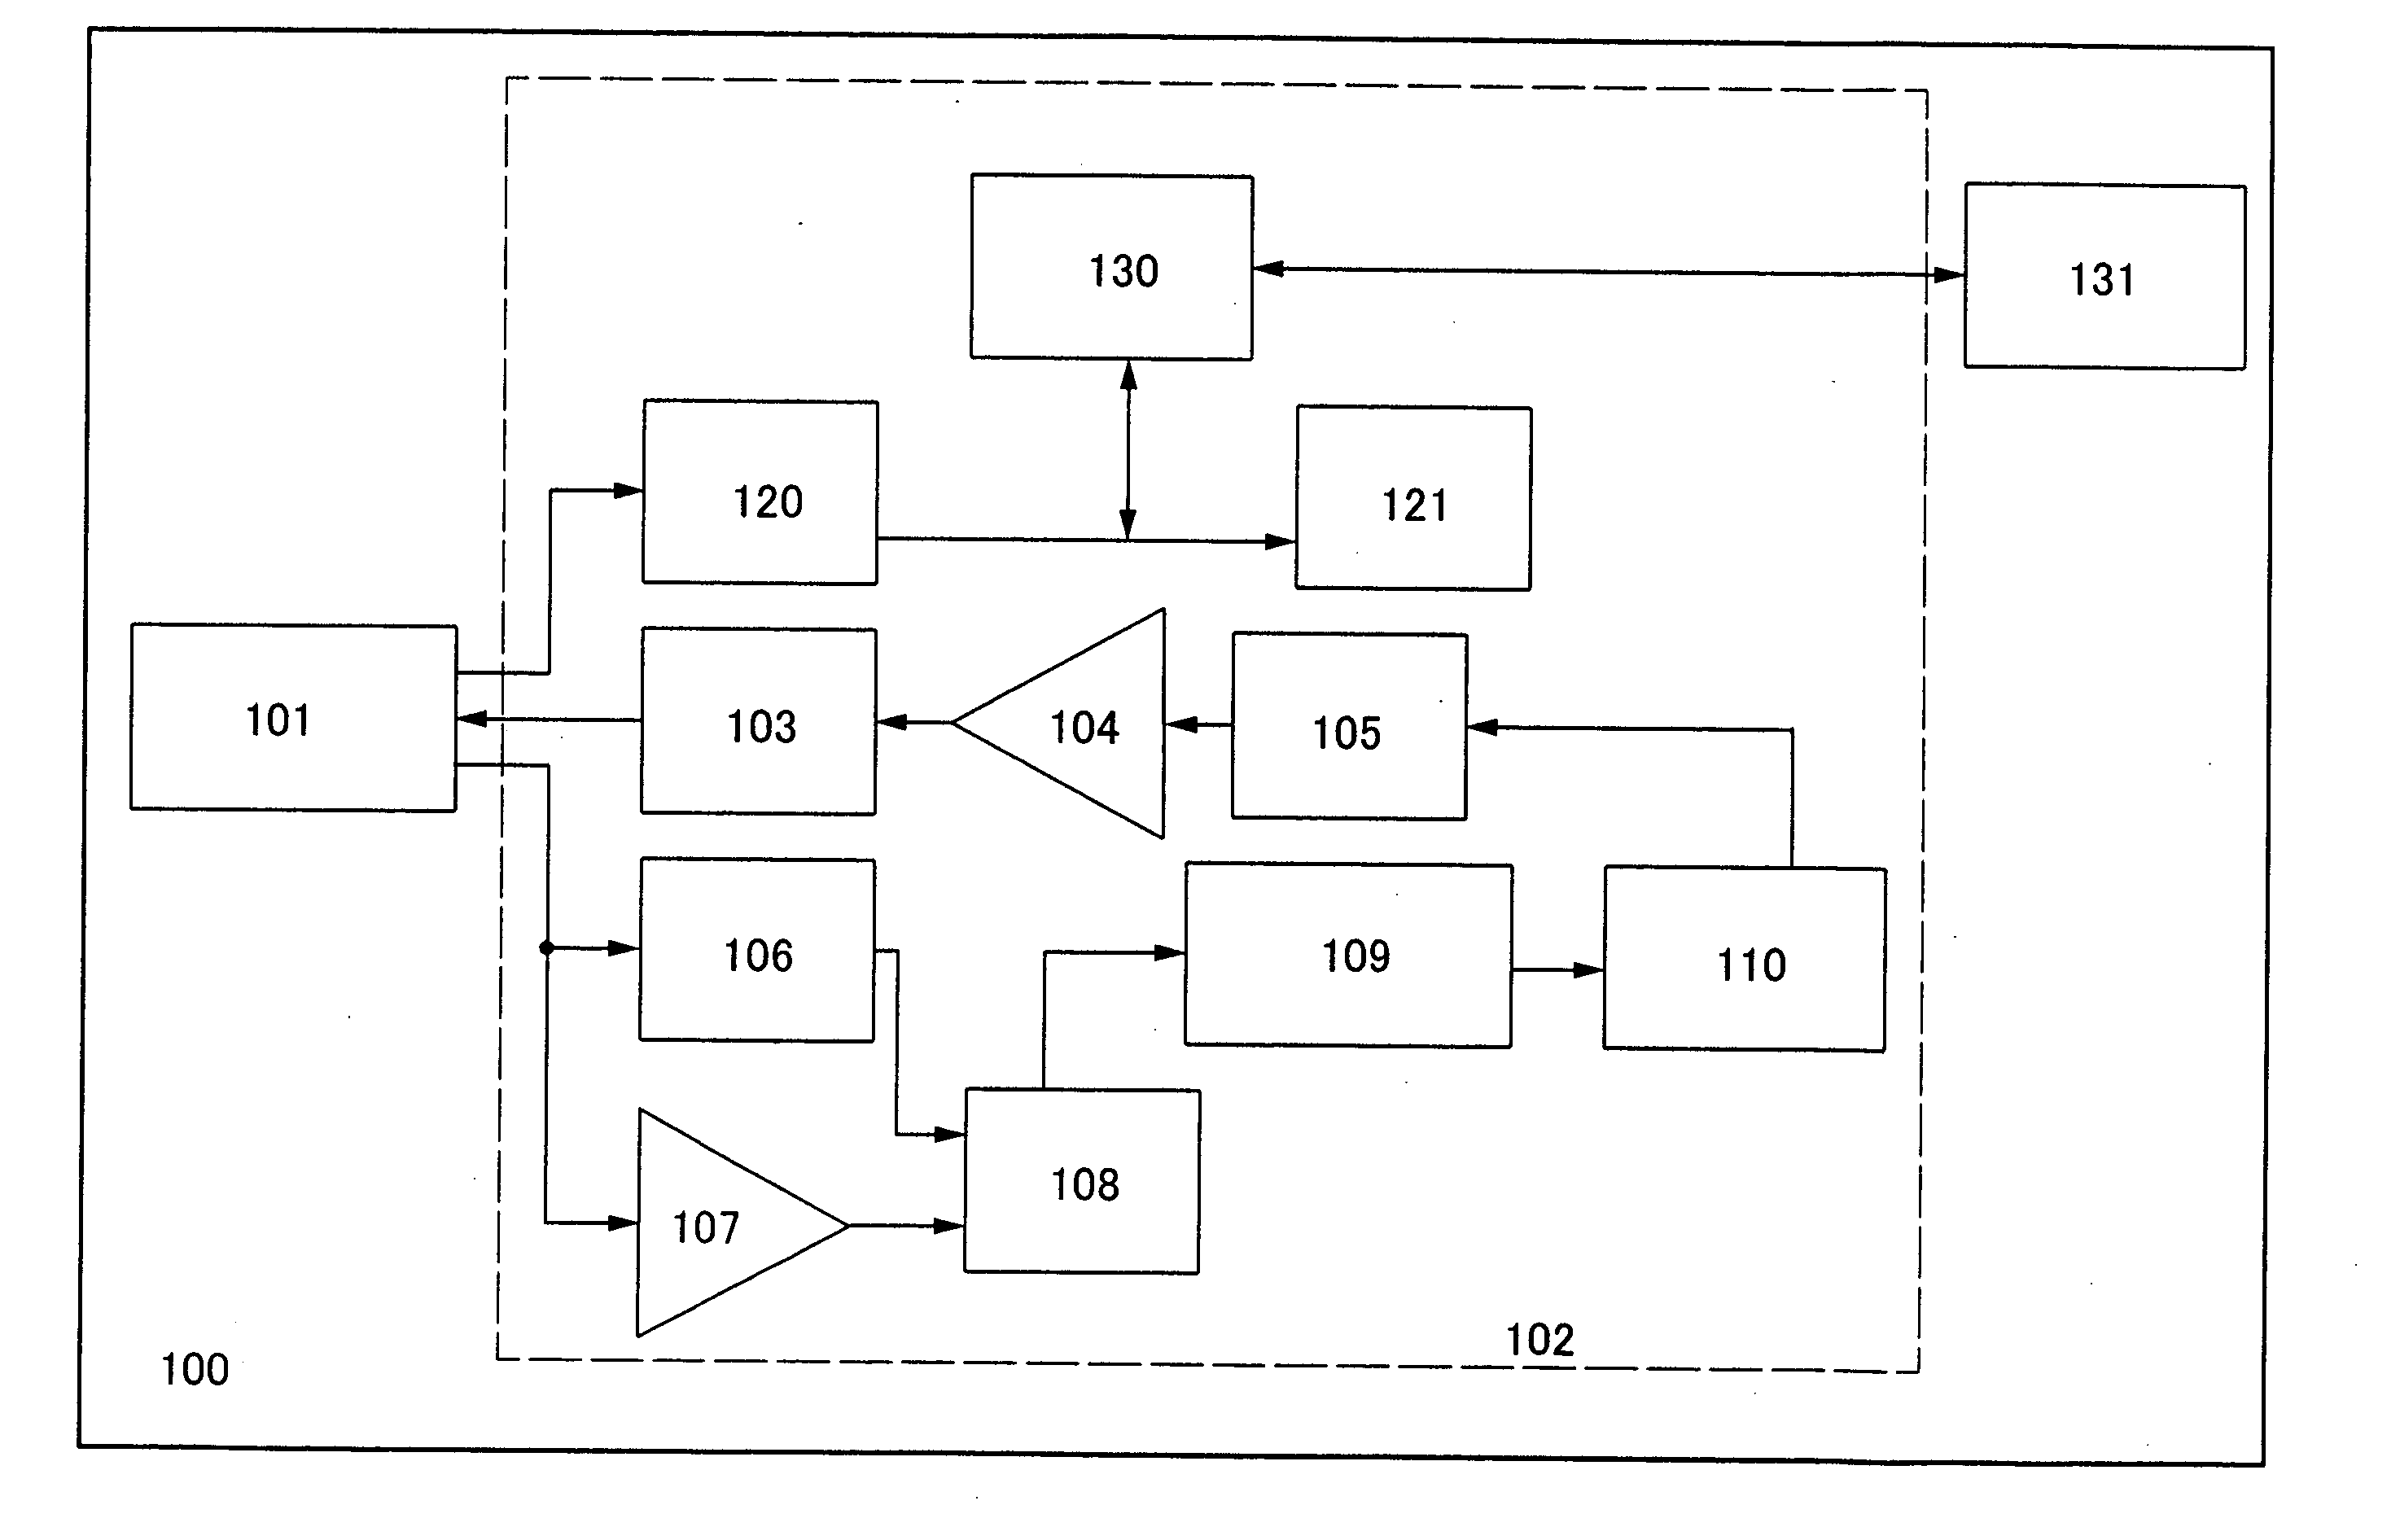 Semiconductor device and method for operating the same